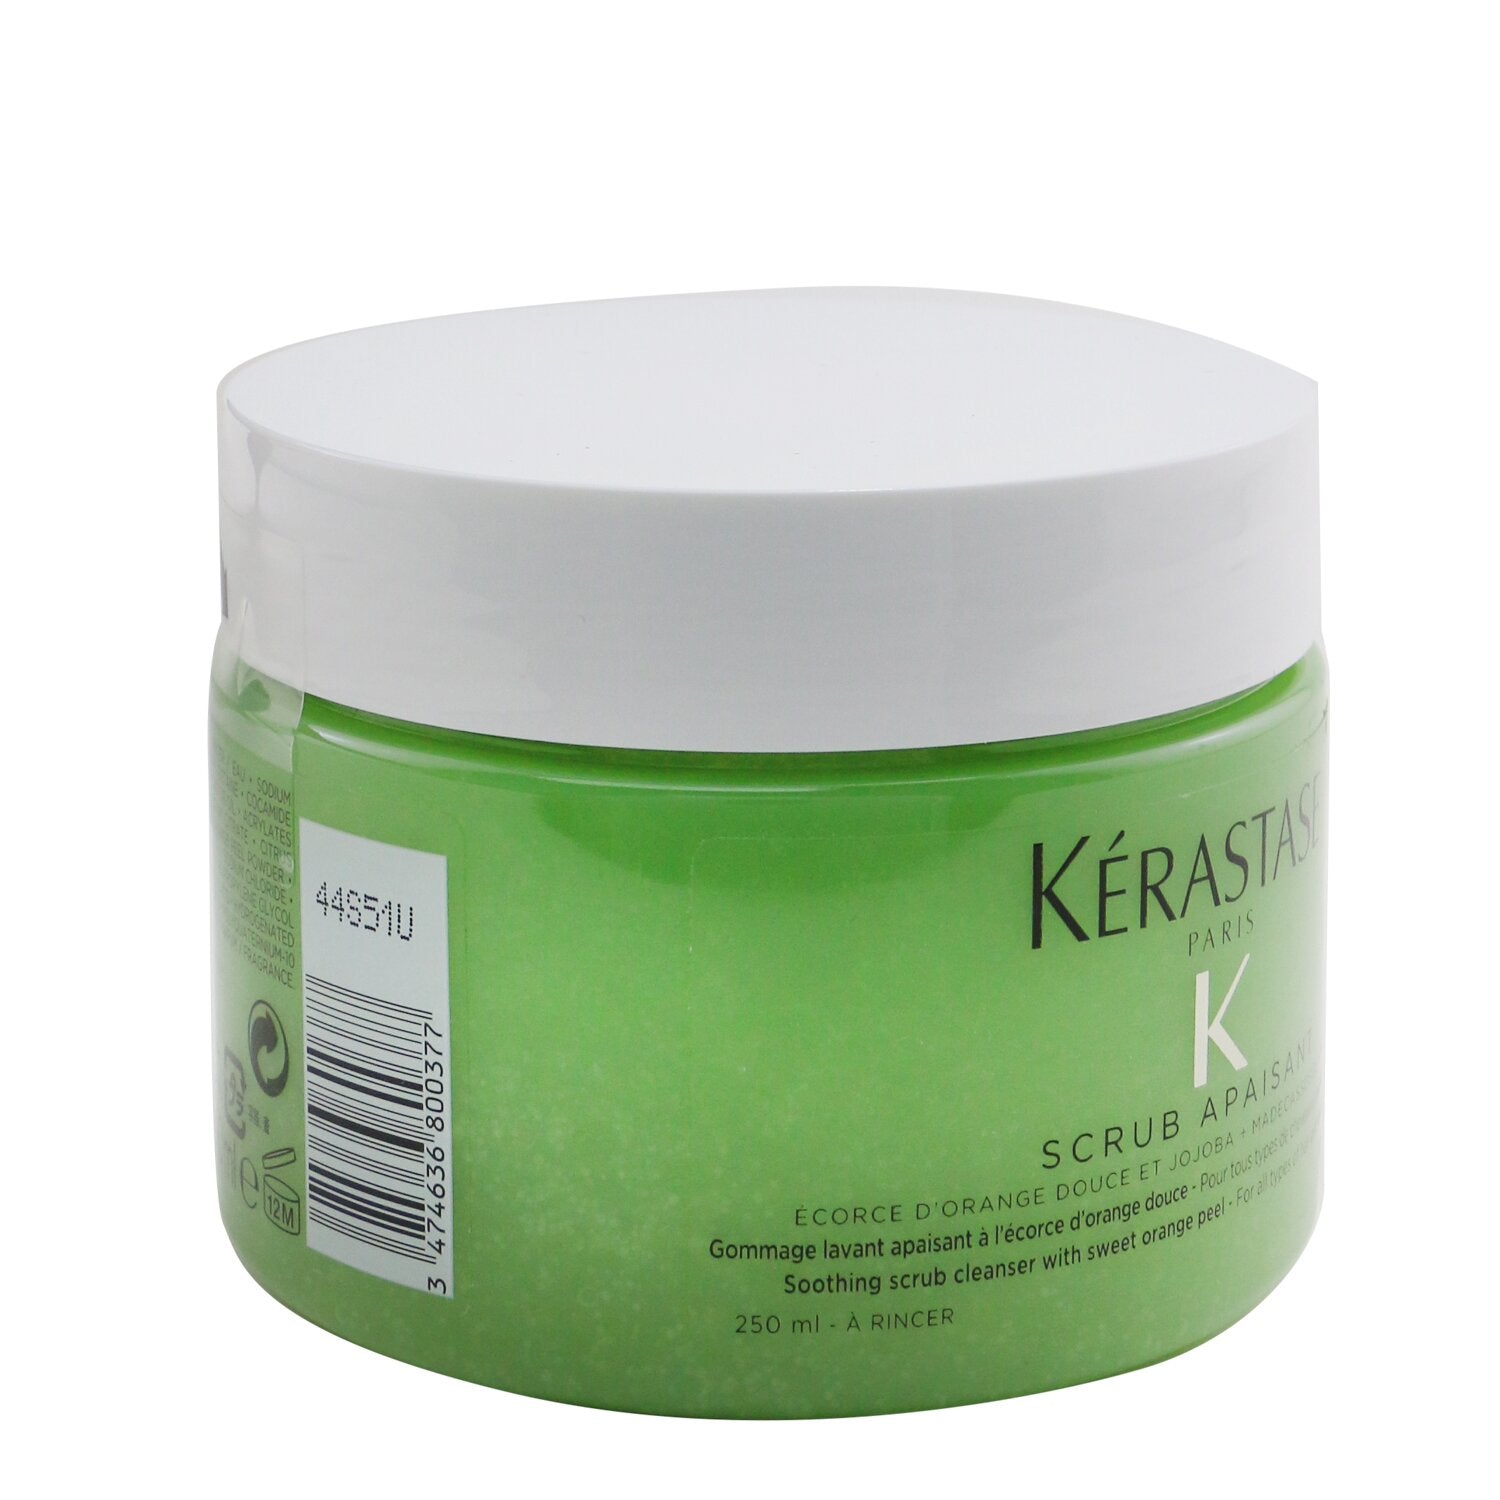 Fusio-Scrub Scrub Soothing Scrub Cleanser with Sweet Peel (For All of Hair and Even Sensitive) for Sale | Kerastase, Hair Care, Buy Now – Author